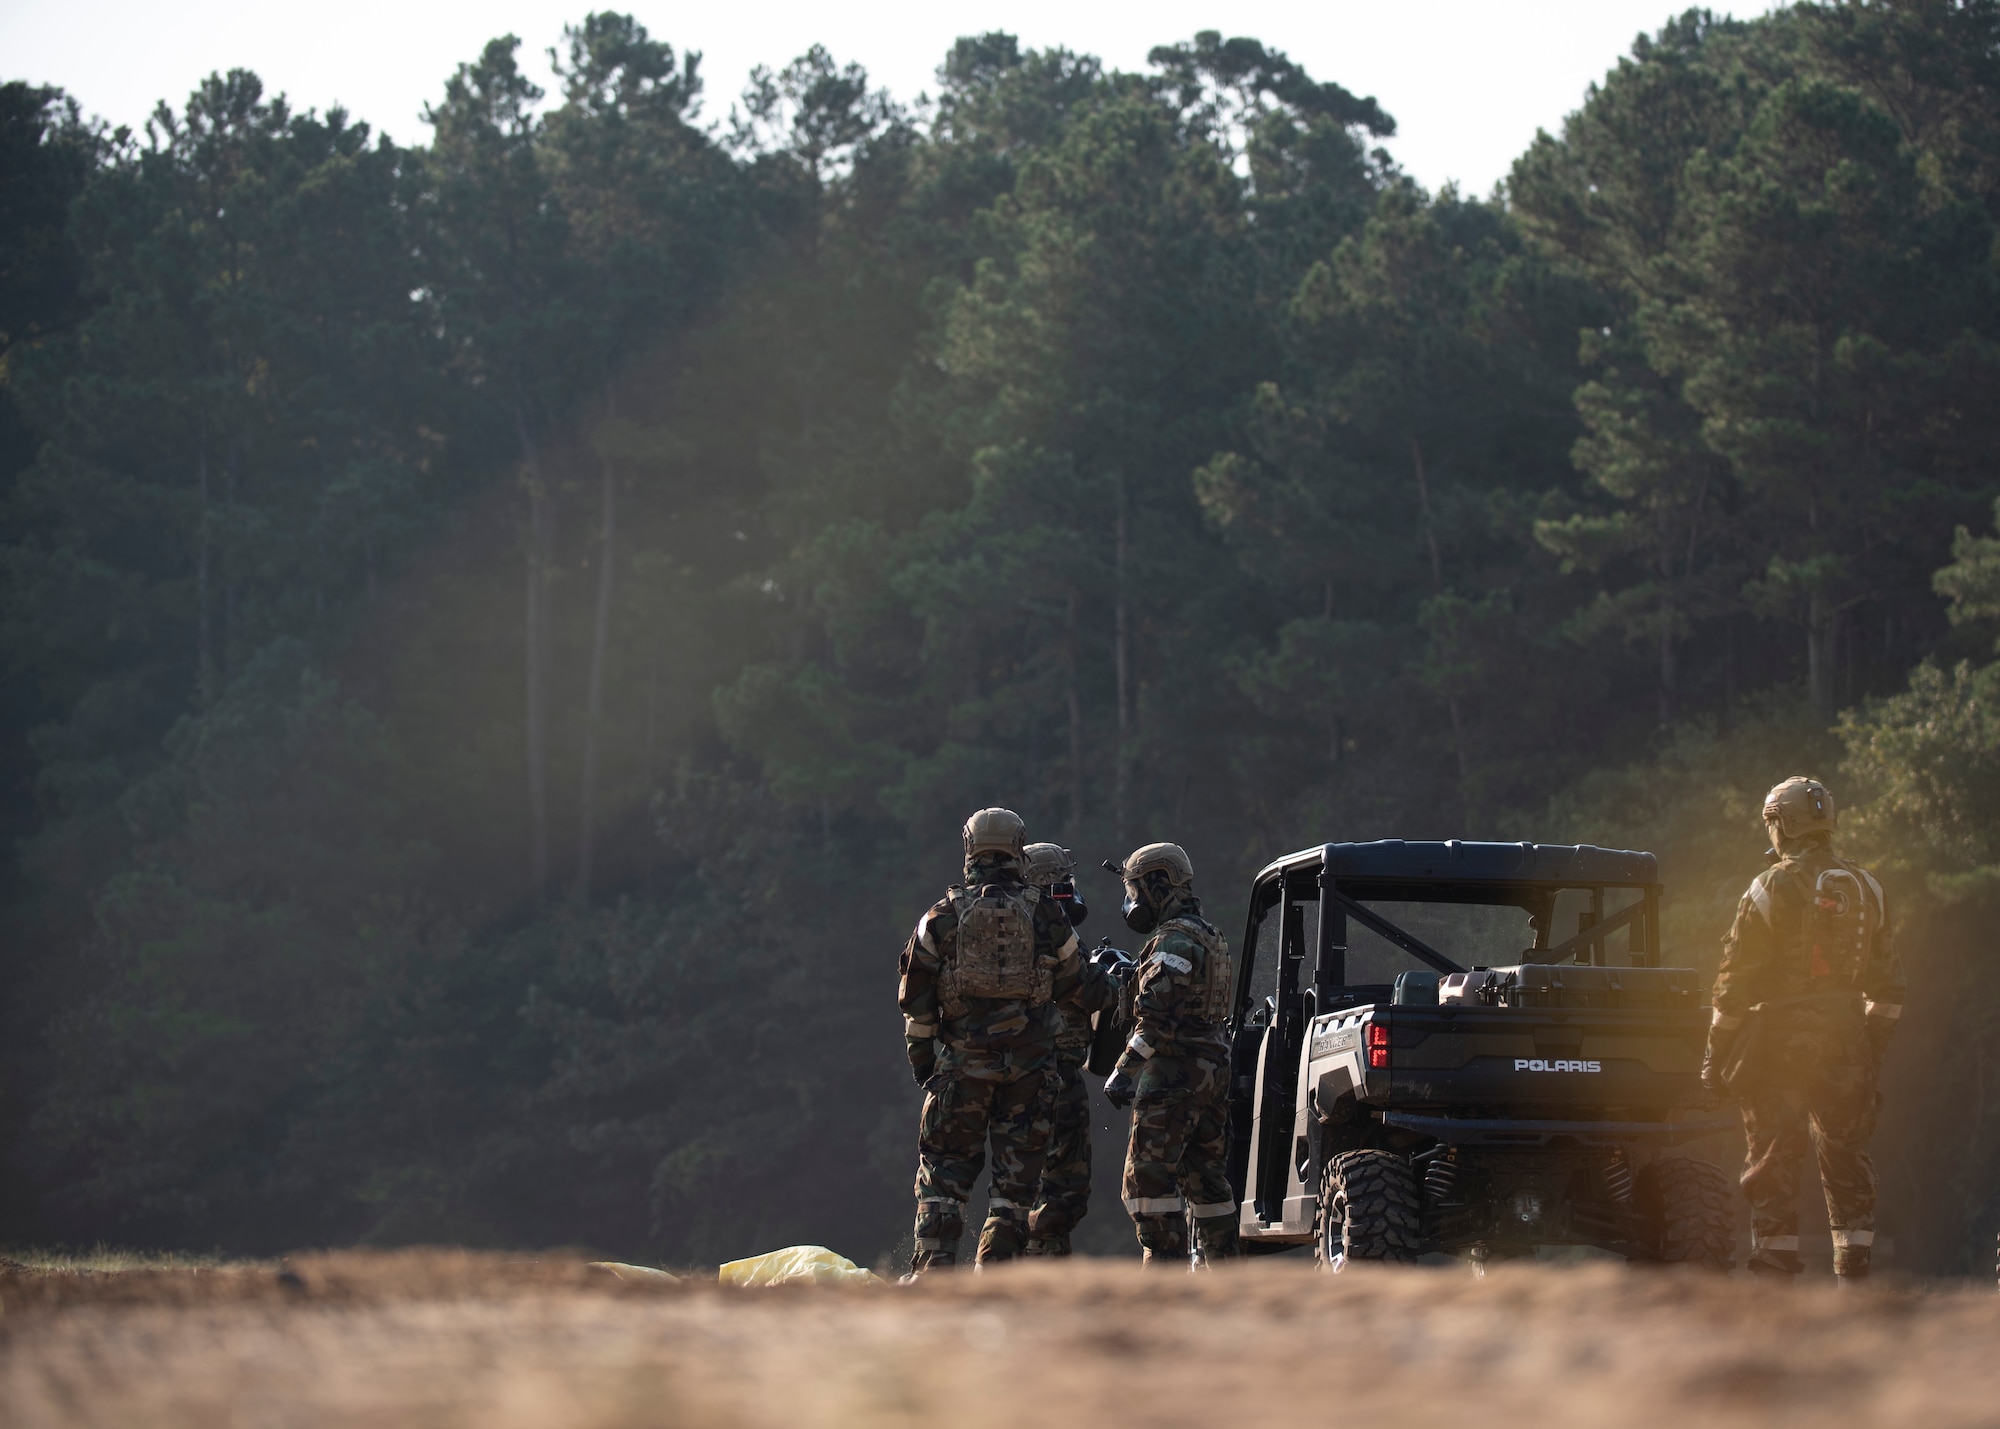 Explosive Ordnance Disposal Airmen from the 4th Civil Engineer Squadron conduct a chemical operation training exercise at Seymour Johnson Air Force Base, North Carolina, August 27, 2020.